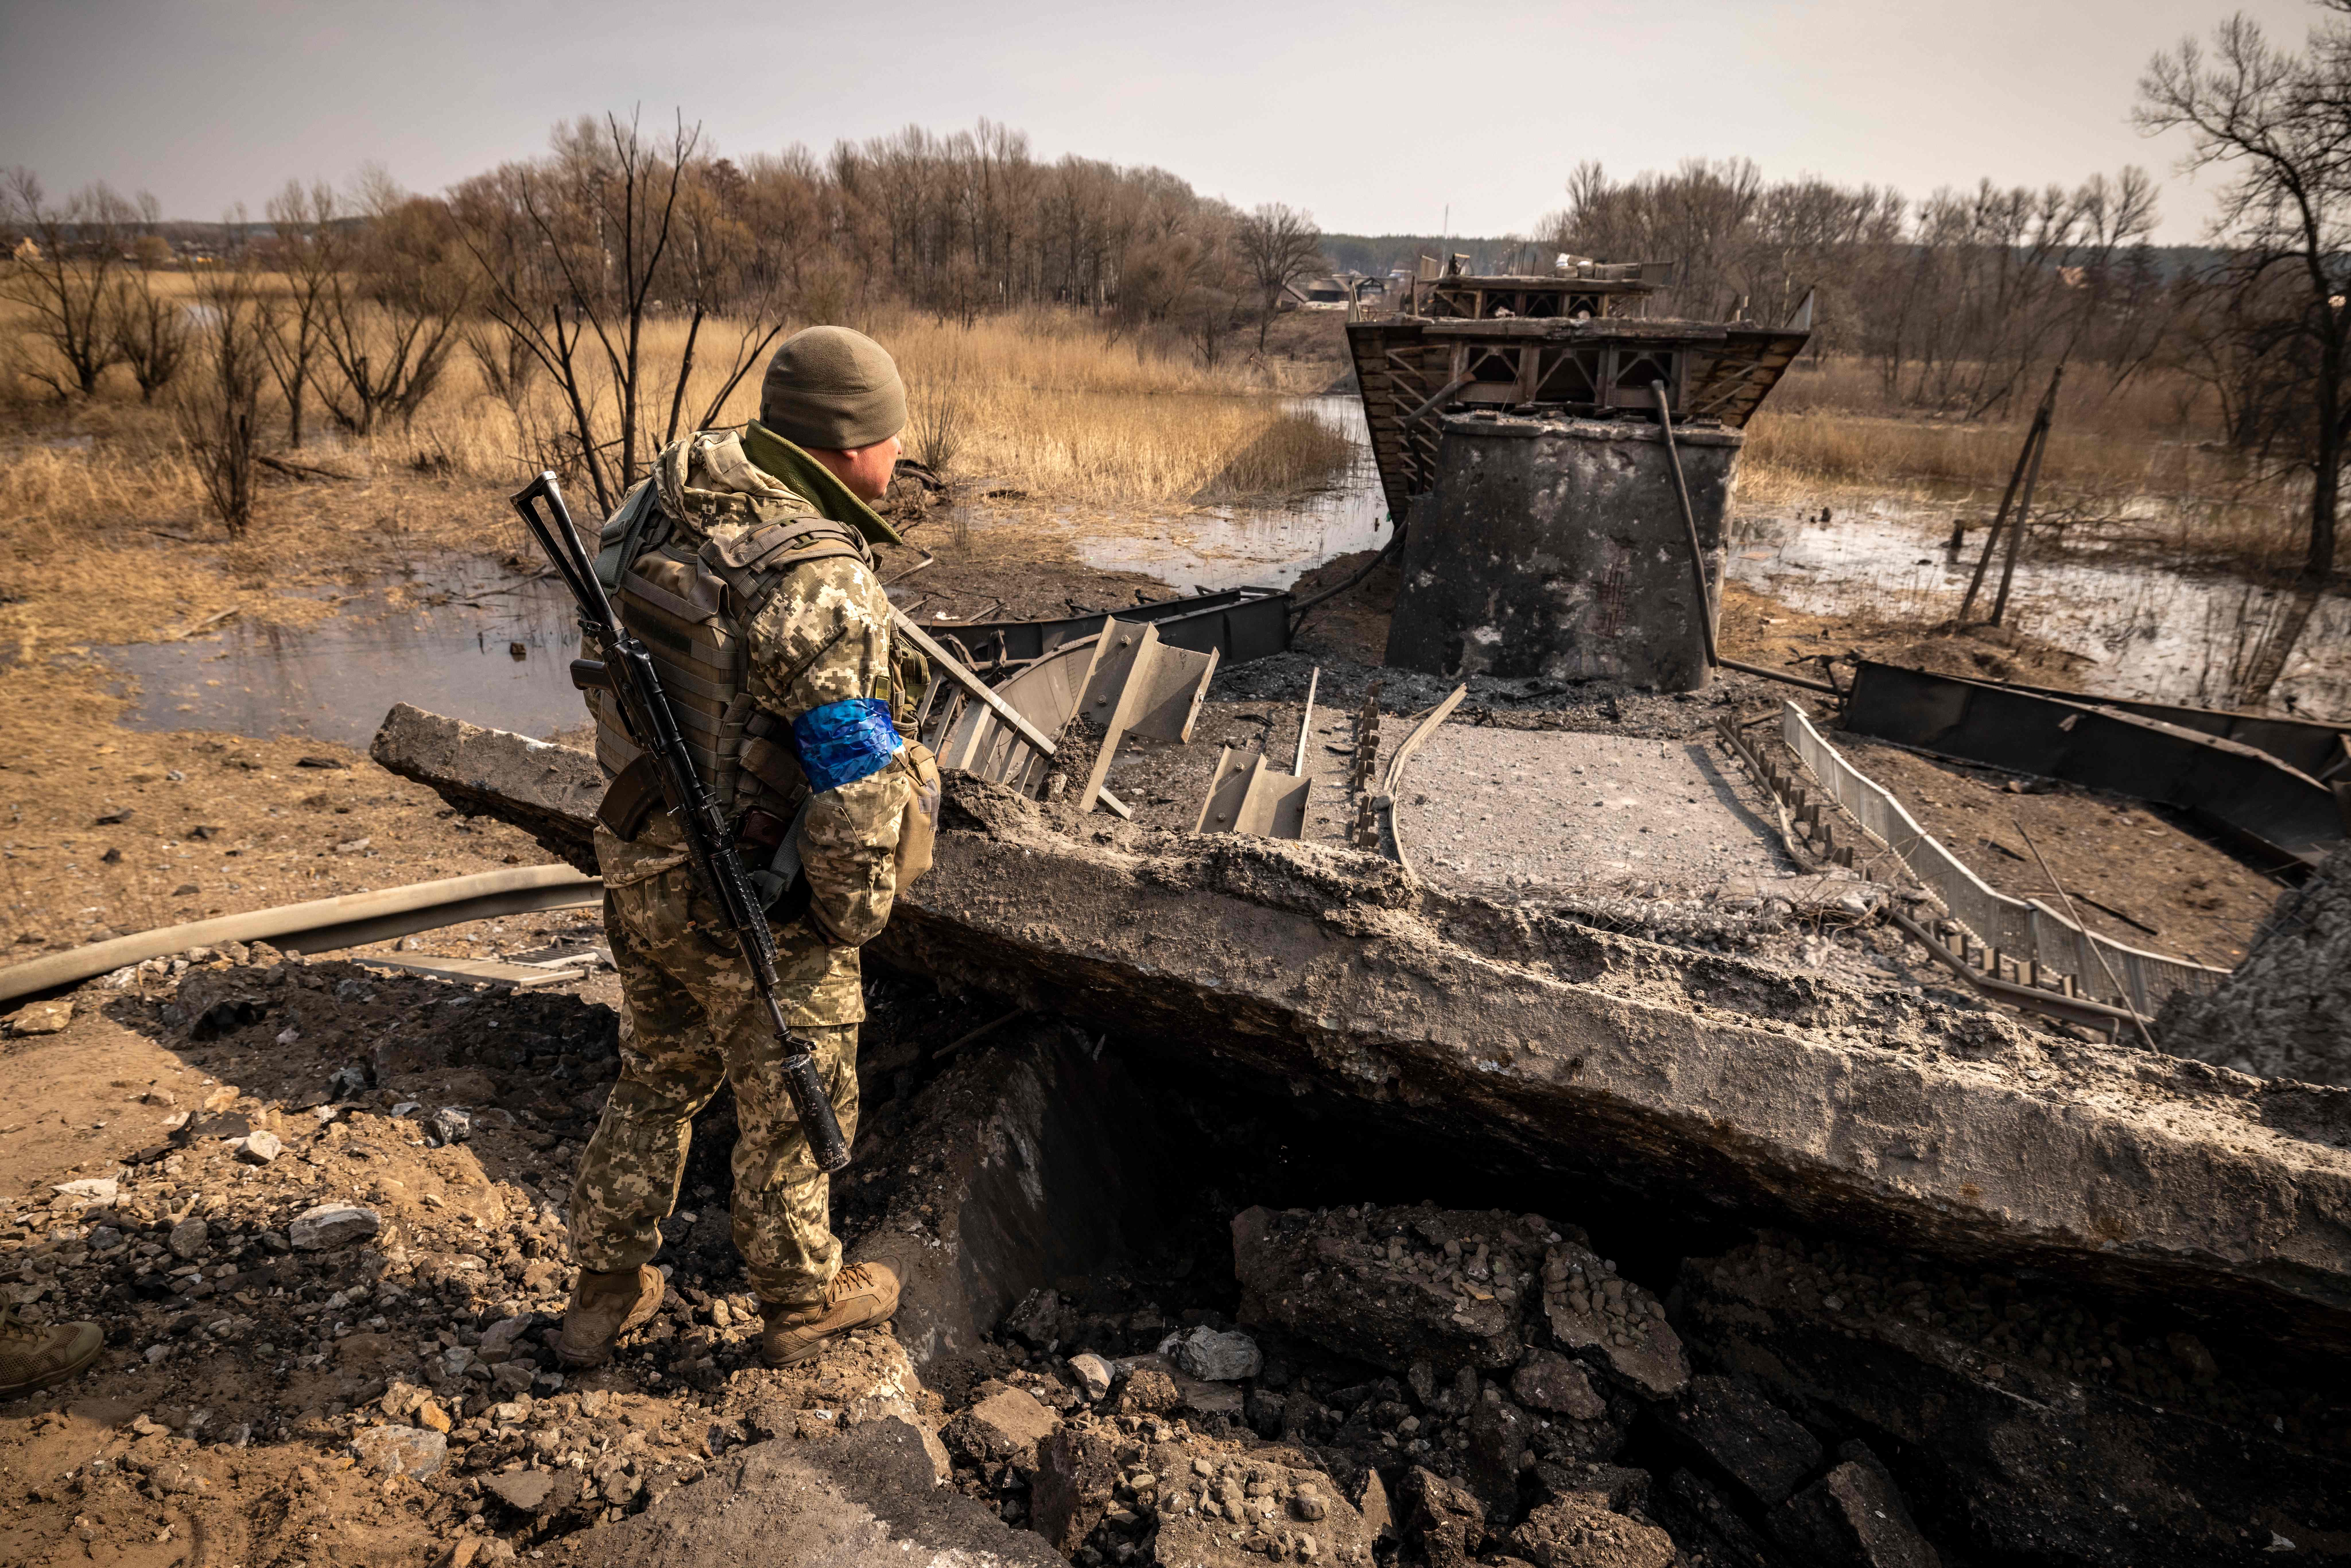 A Ukrainian soldier patrols near a bridge destroyed by the Russian army in the town of Rogan, east of Kharkiv, 30 March 2022